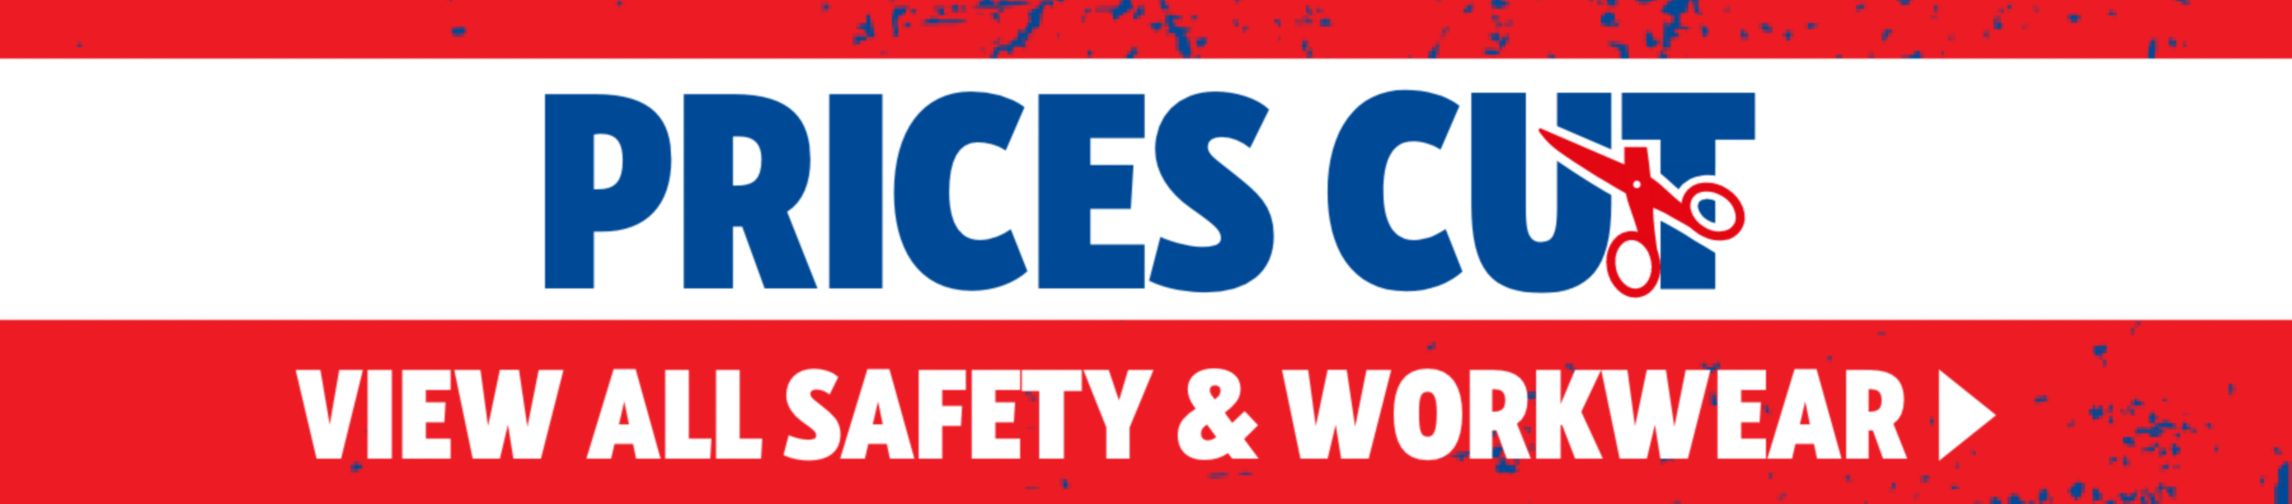 View all Prices Cut on Safety & Workwear